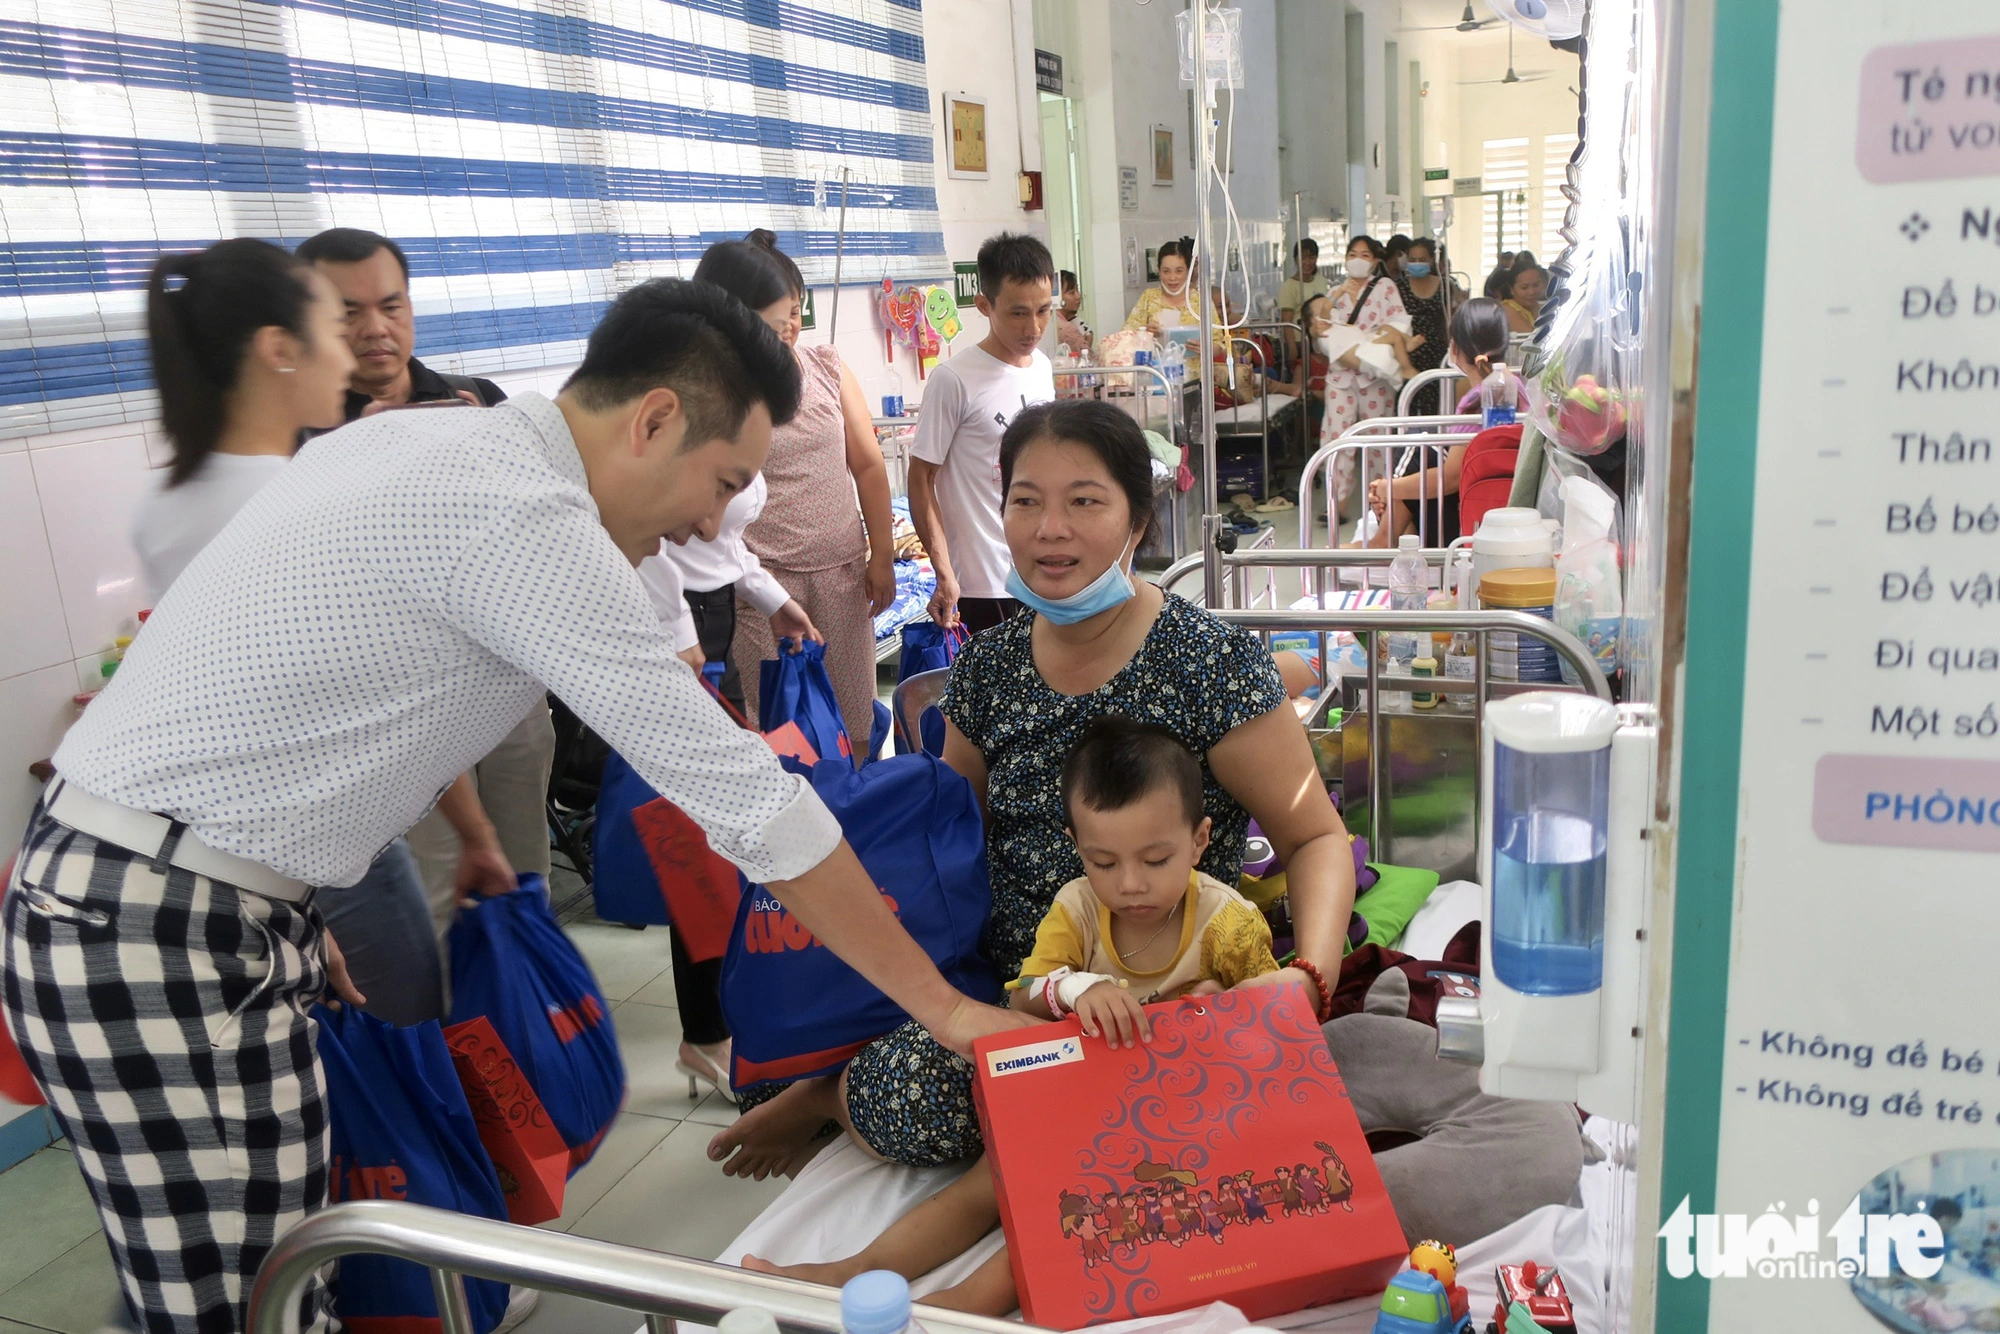 Nguyen Fei Hung gives gifts and meets child Nguyen Thanh Nhan (3 years old), who is being treated for brain hemorrhage - Photo: TTD